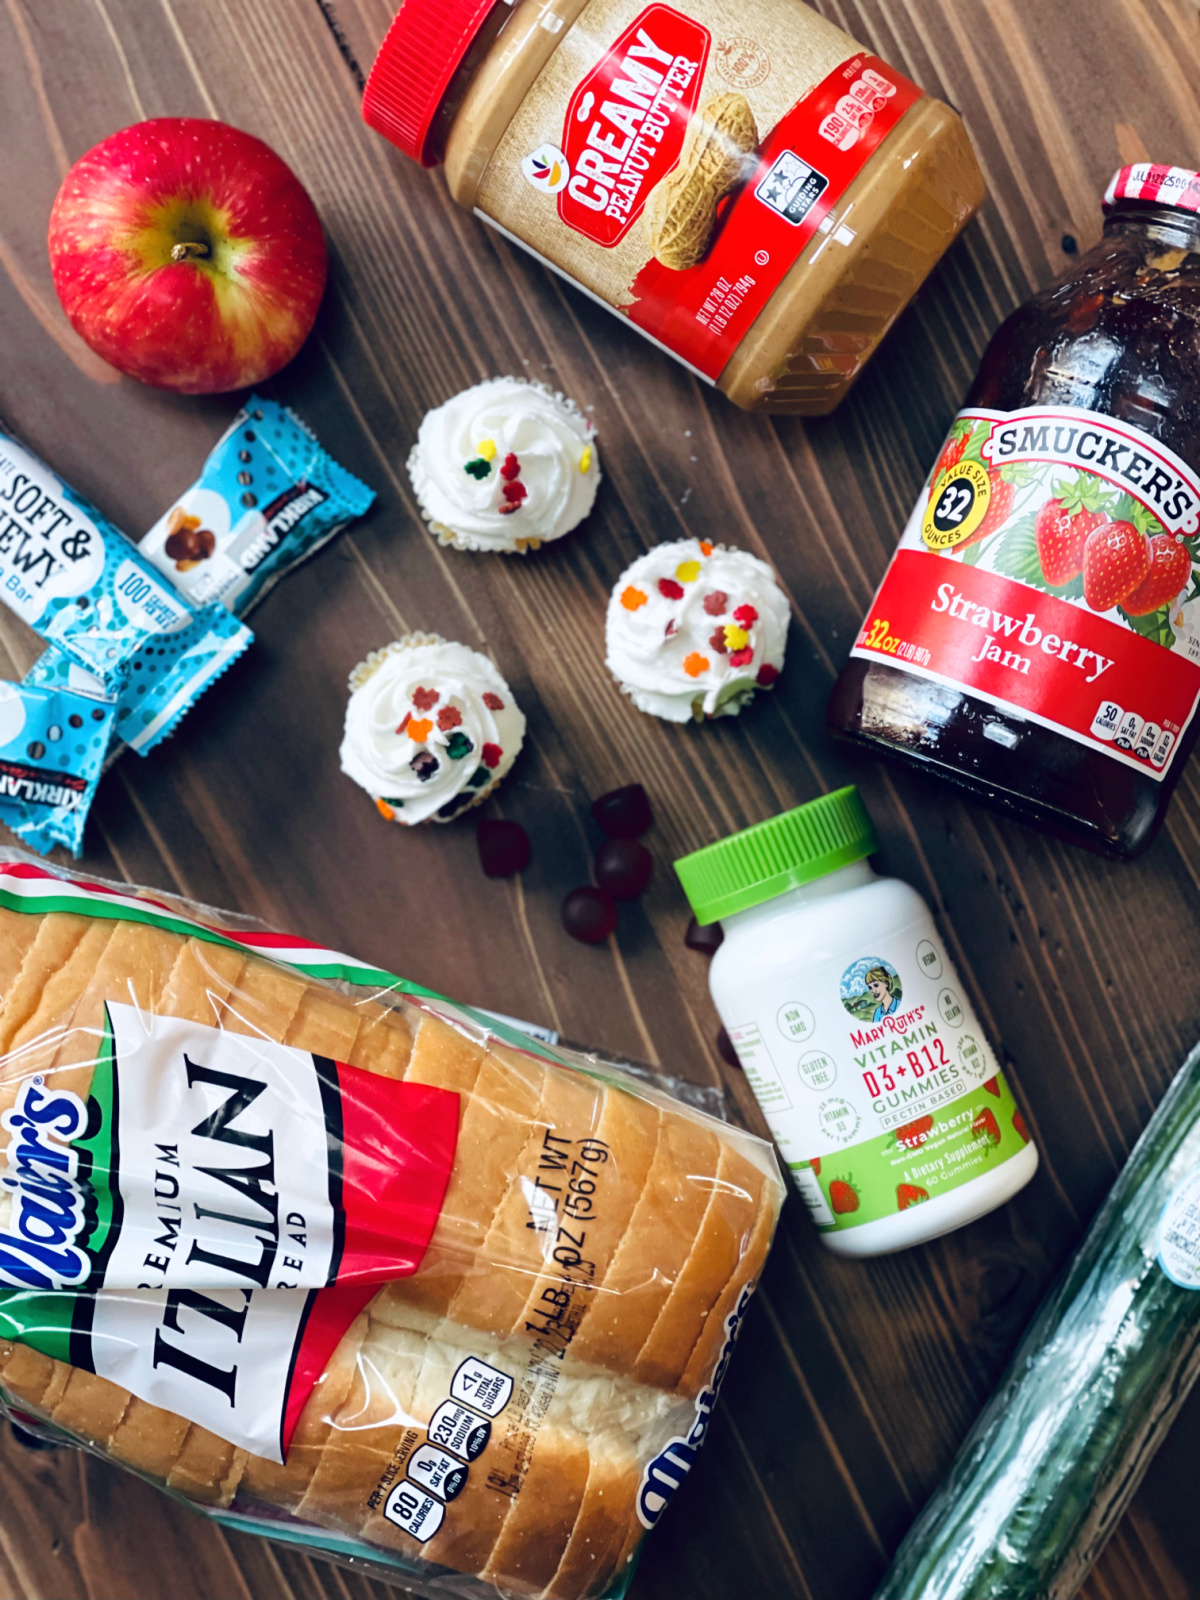 flat lay with bread, vitamins, granola bars, apples, cupcakes, peanut butter and jelly.